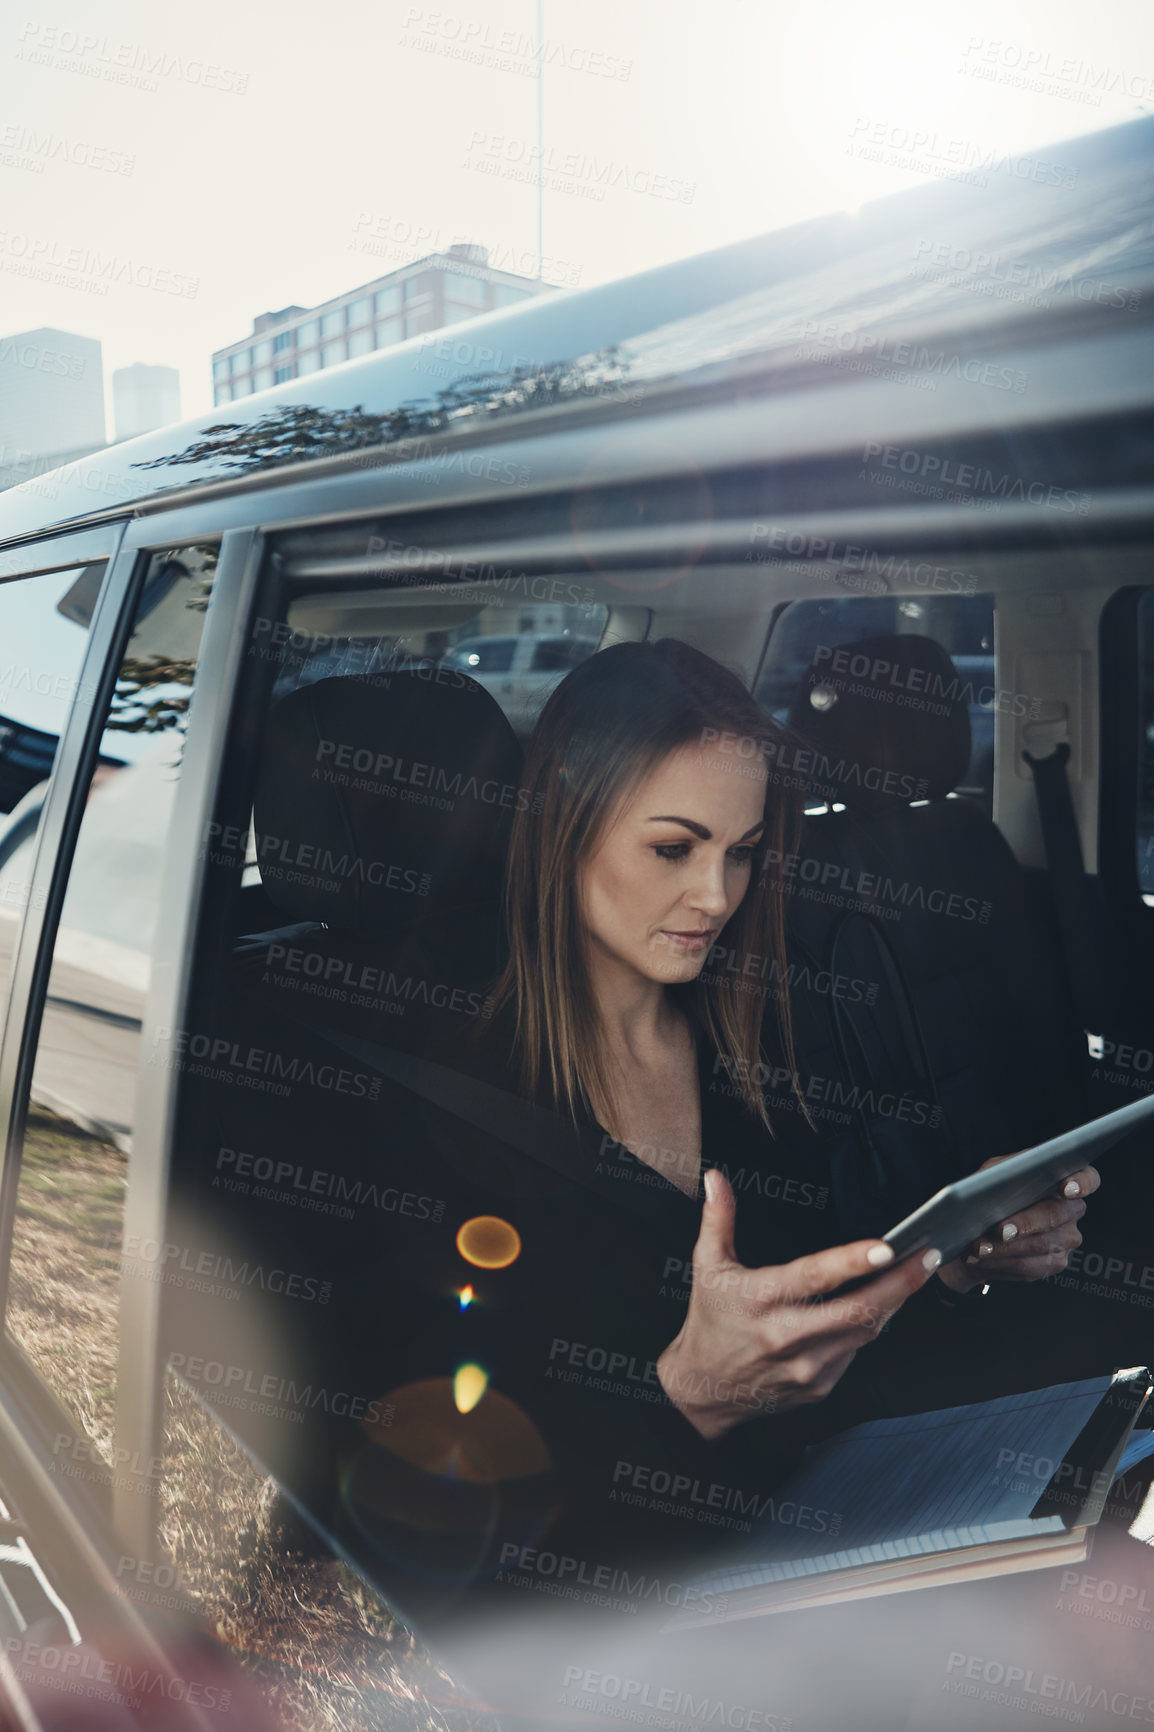 Buy stock photo Shot of a young businesswoman using a digital tablet while traveling in a car